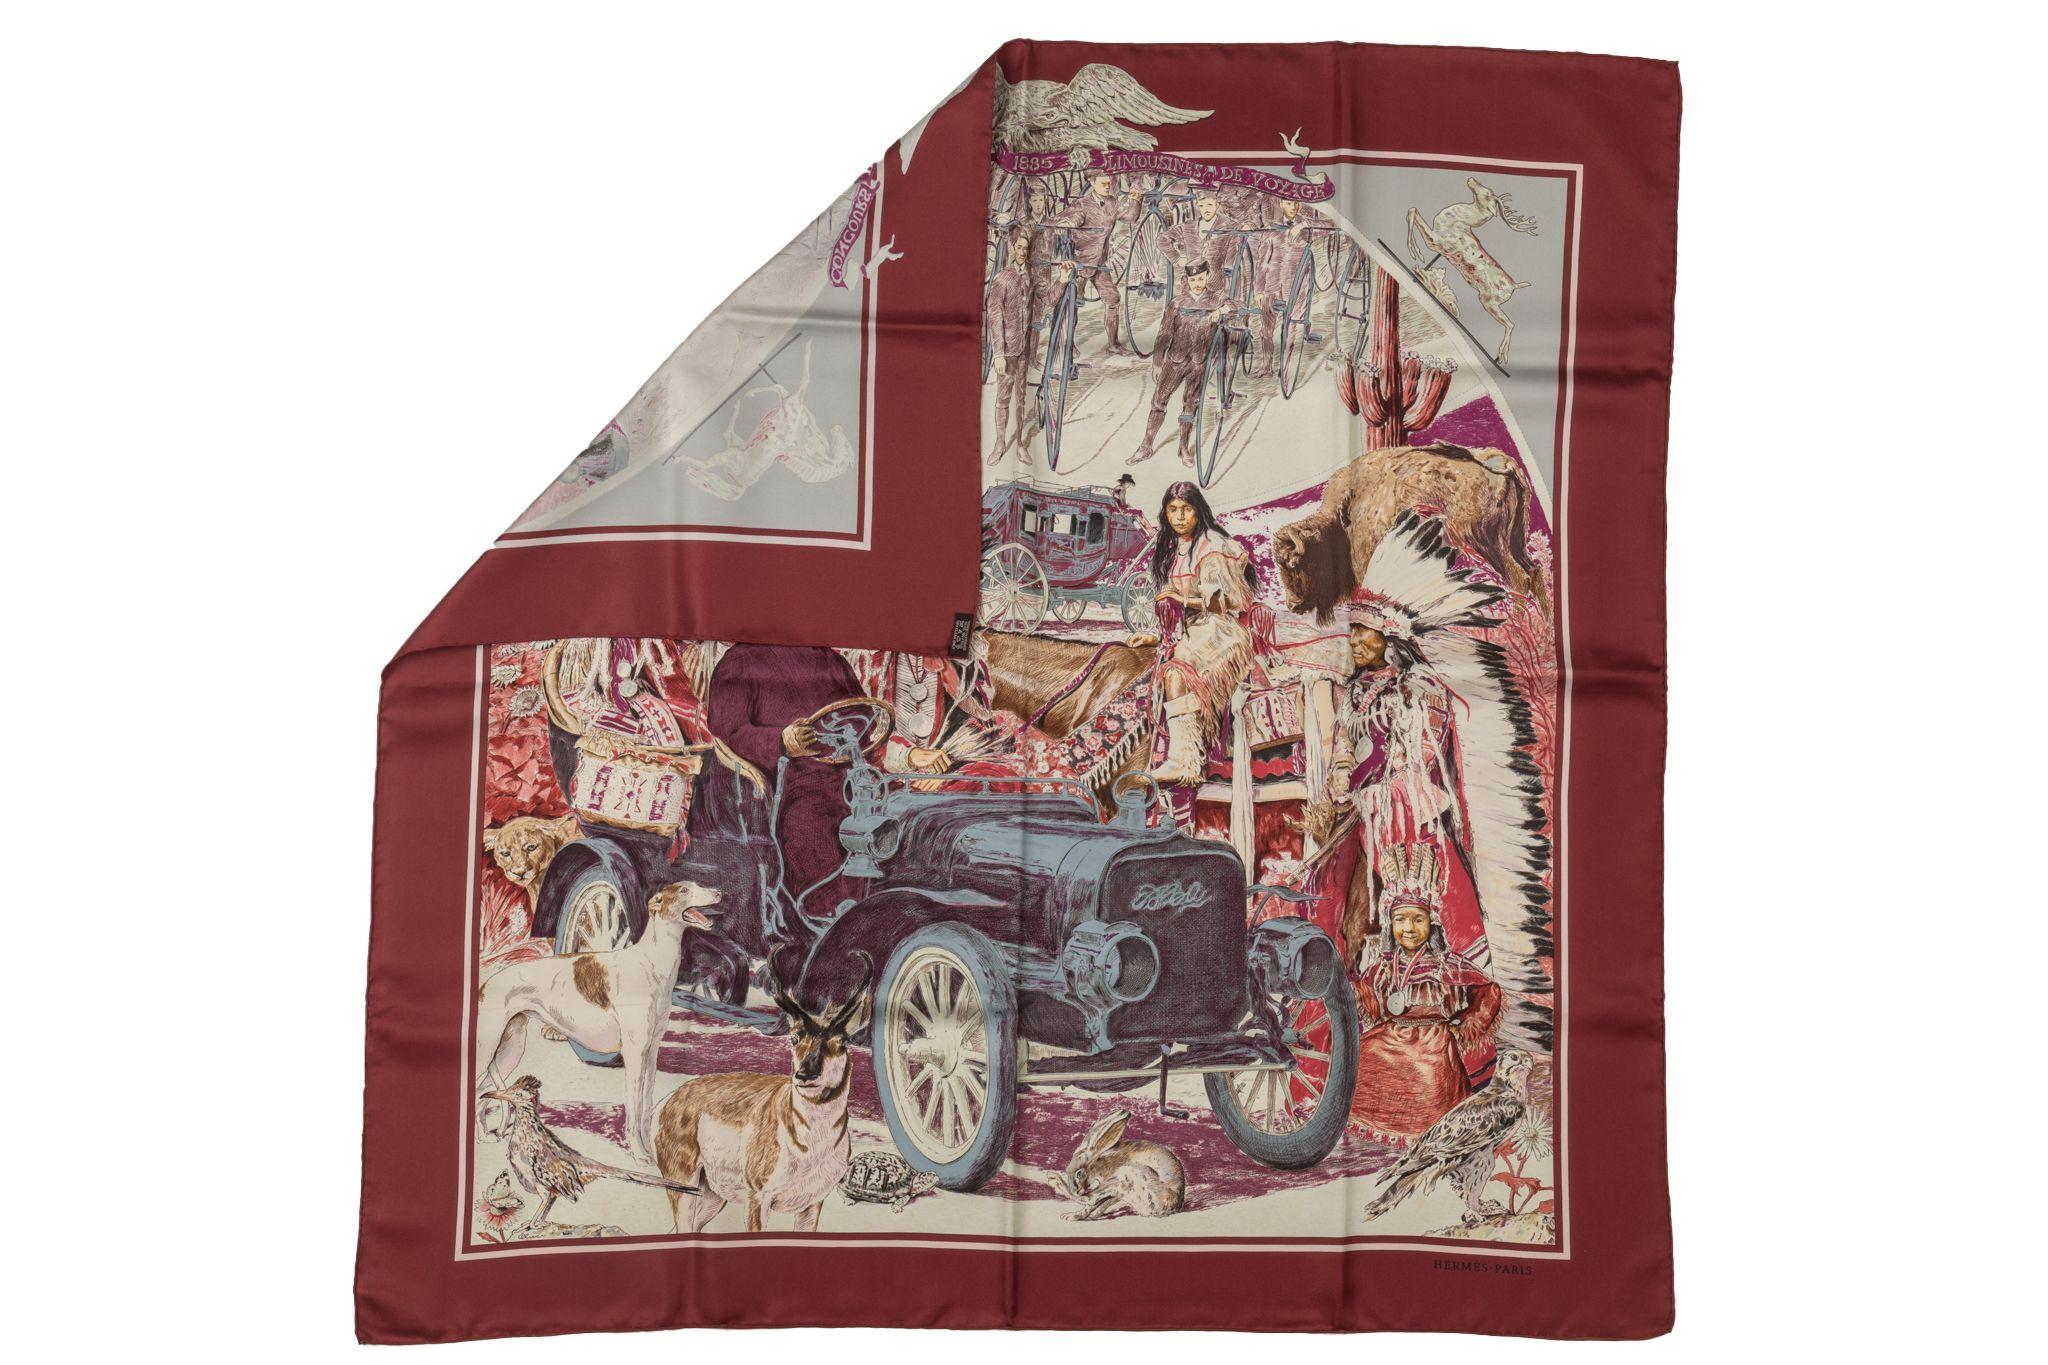 Hermes Concours d'Elegance Scarf in Box In Excellent Condition For Sale In West Hollywood, CA